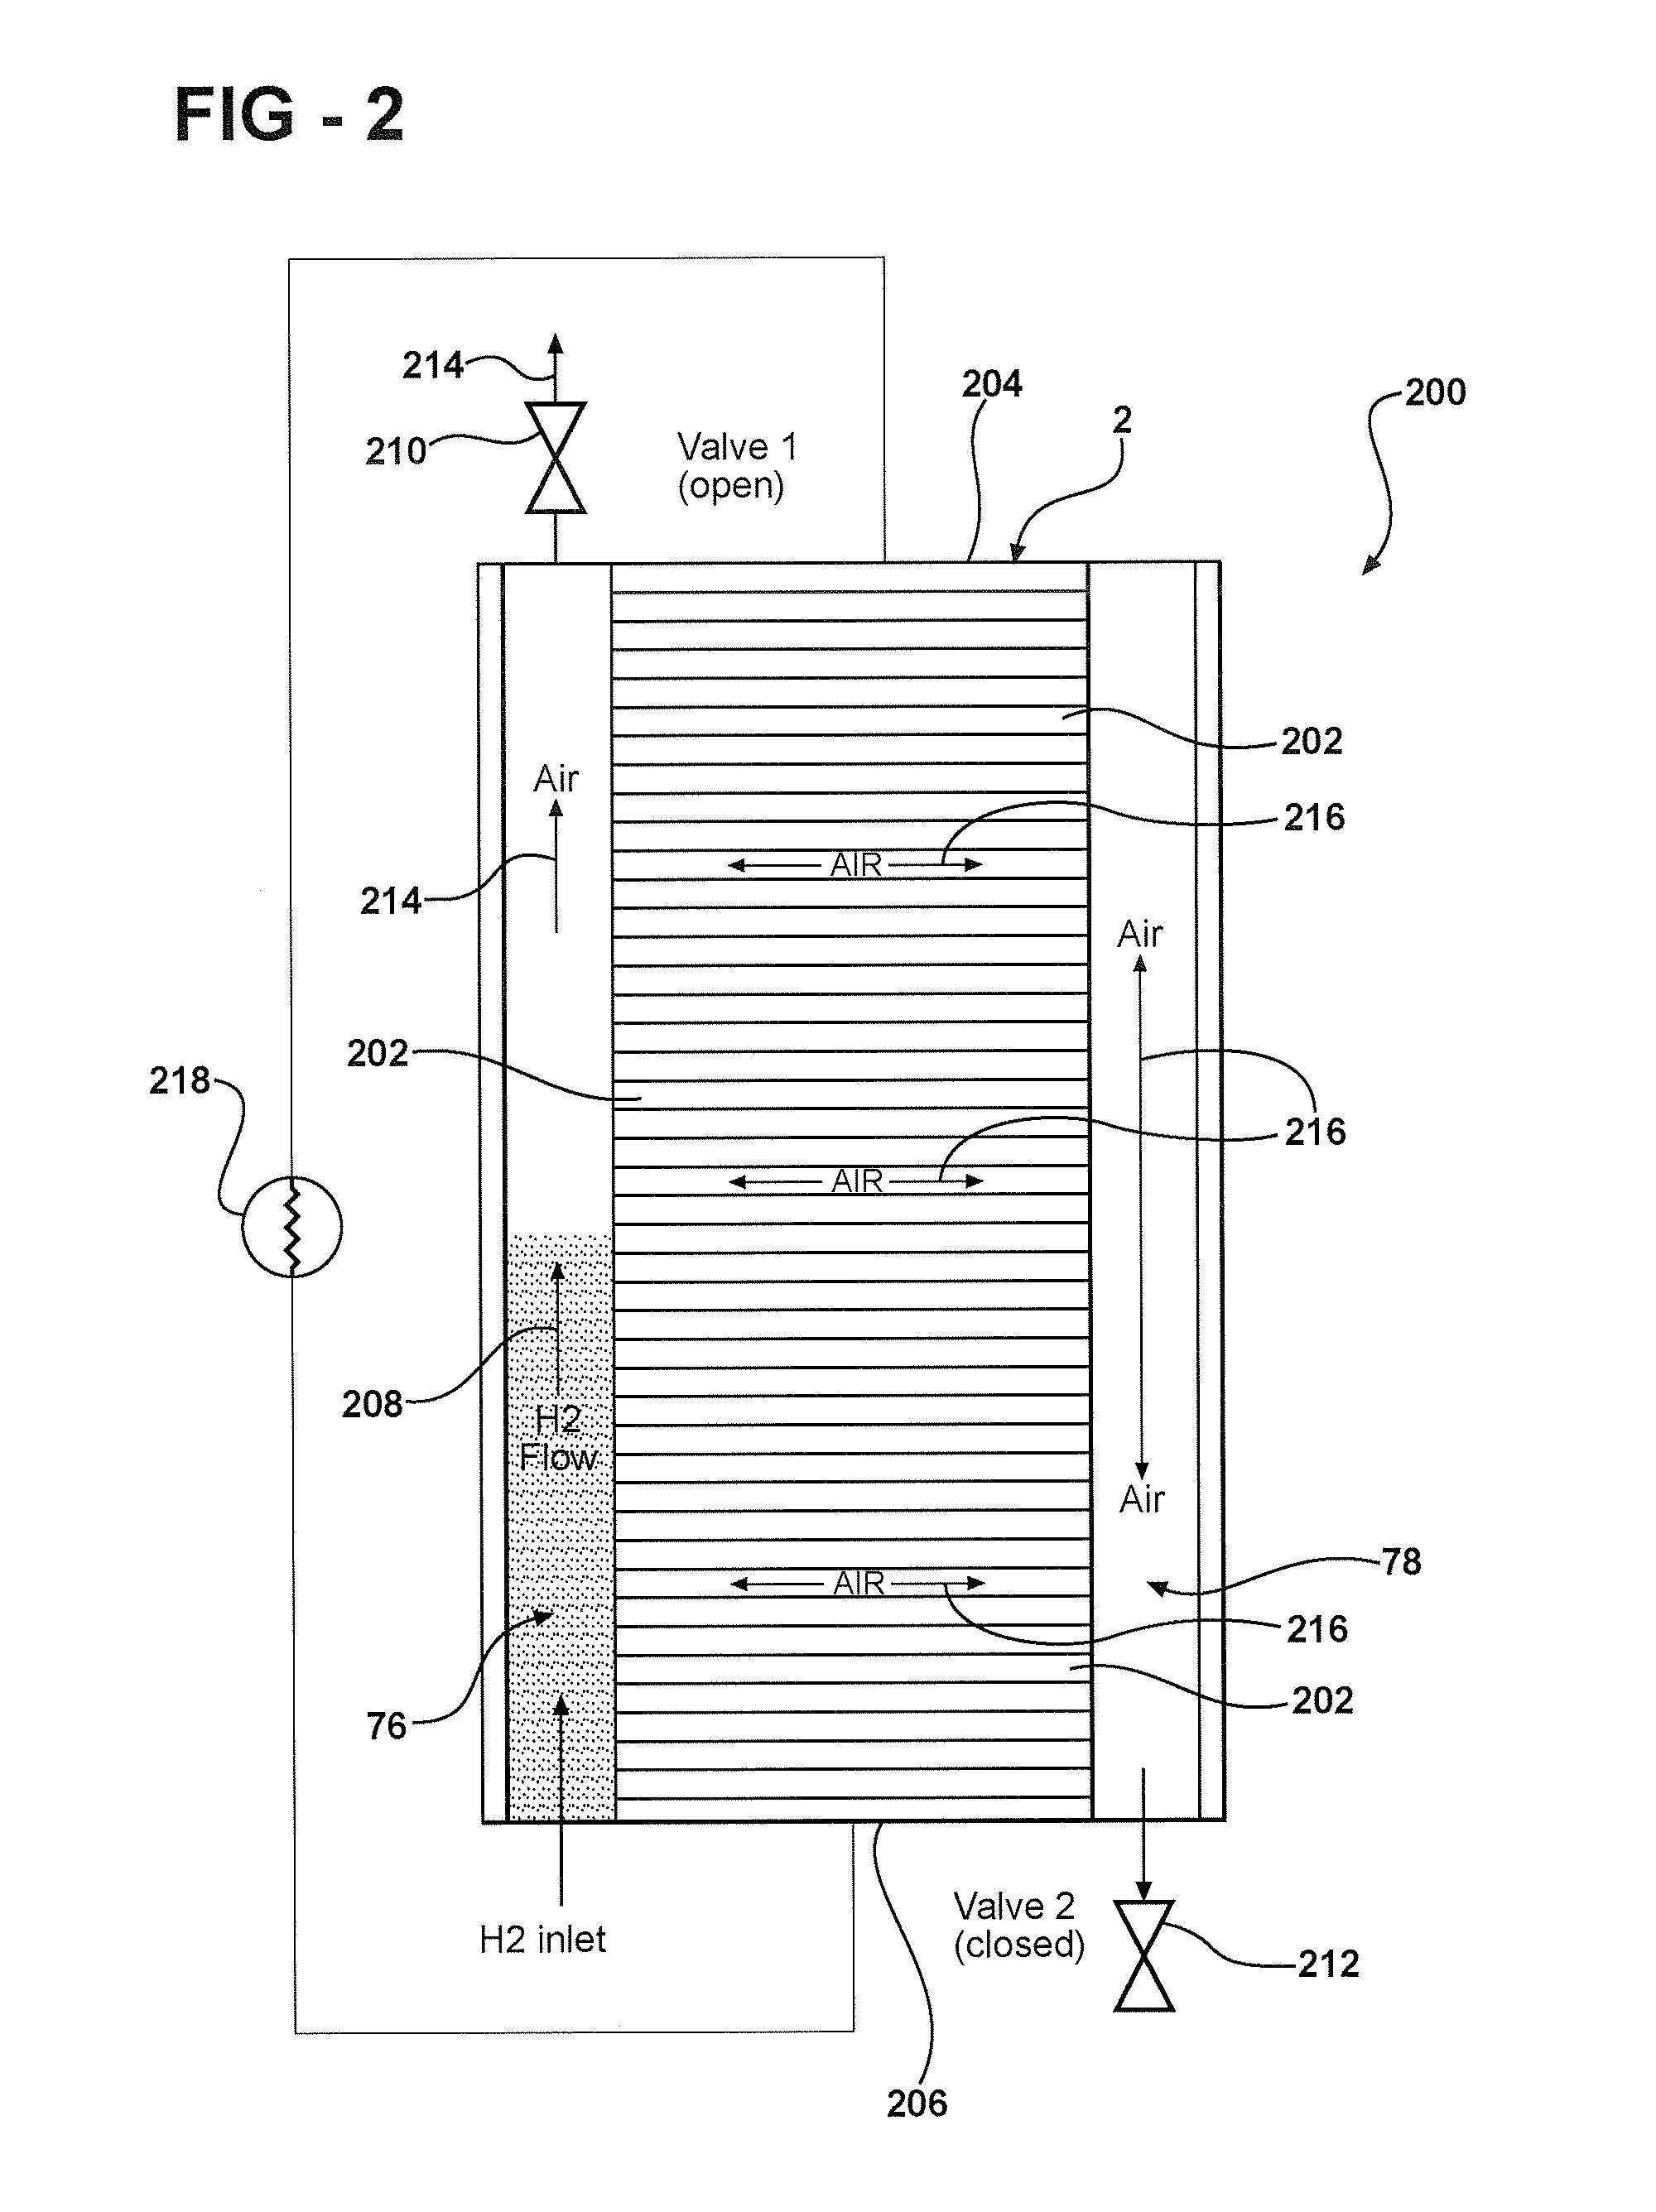 Method for fuel cell start-up with uniform hydrogen flow